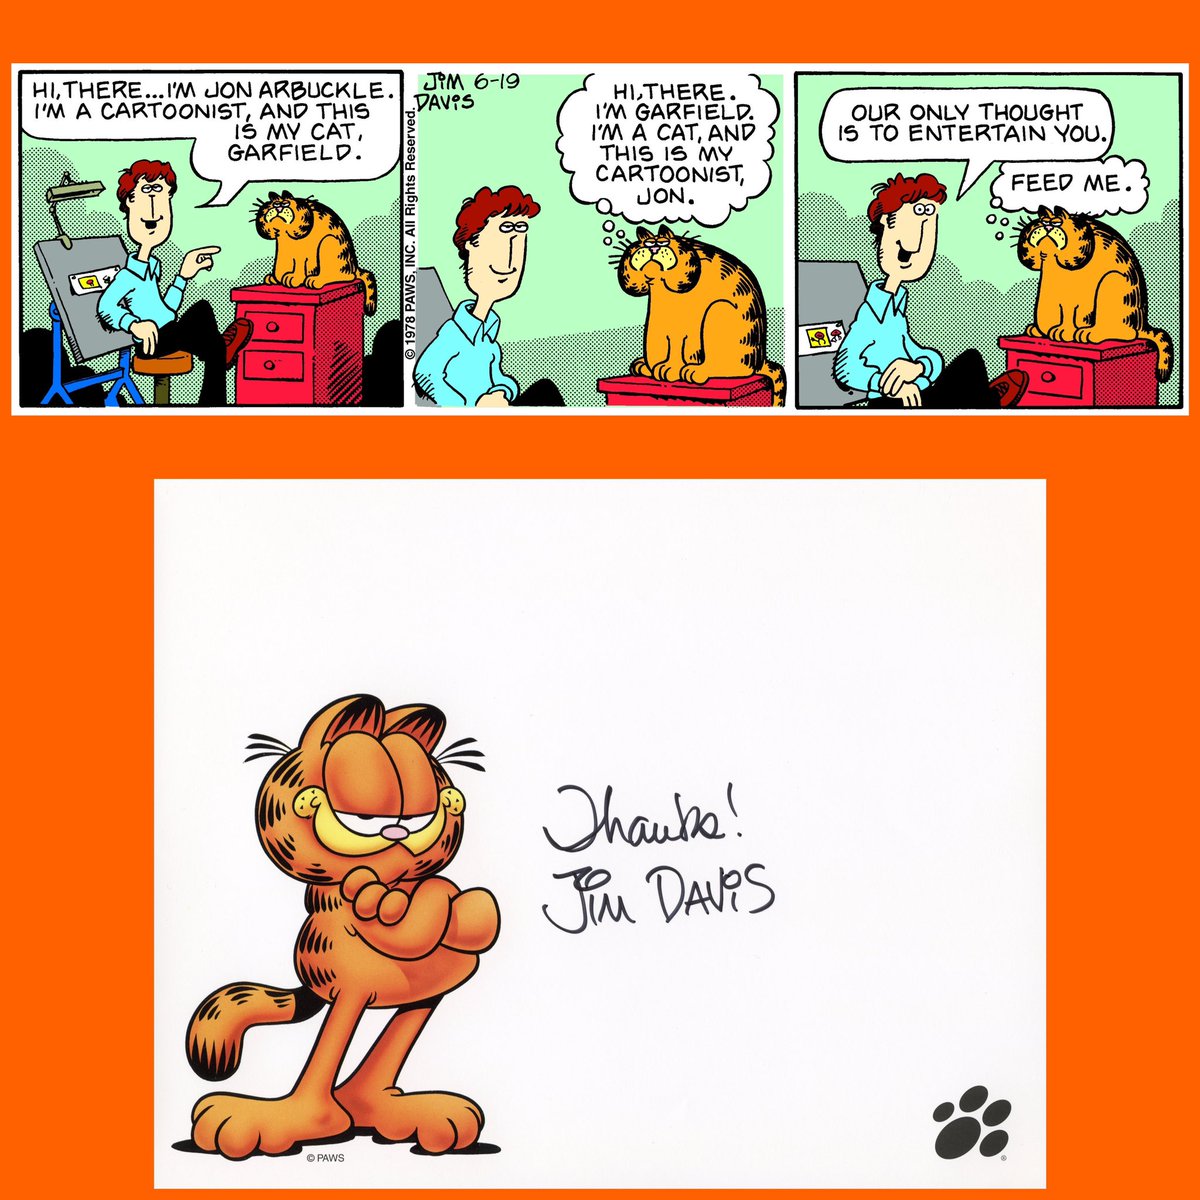 June 19, 1978 - The newspaper comic strip “Garfield” made its nationwide debut. From 1976 to 1978 the comic strip was known as “Jon” and ran in a local Indiana newspaper. 🐾 * 8 x 10 photo of @Garfield signed by creator Jim Davis, is from my collection. 📰#Garfield #JimDavis